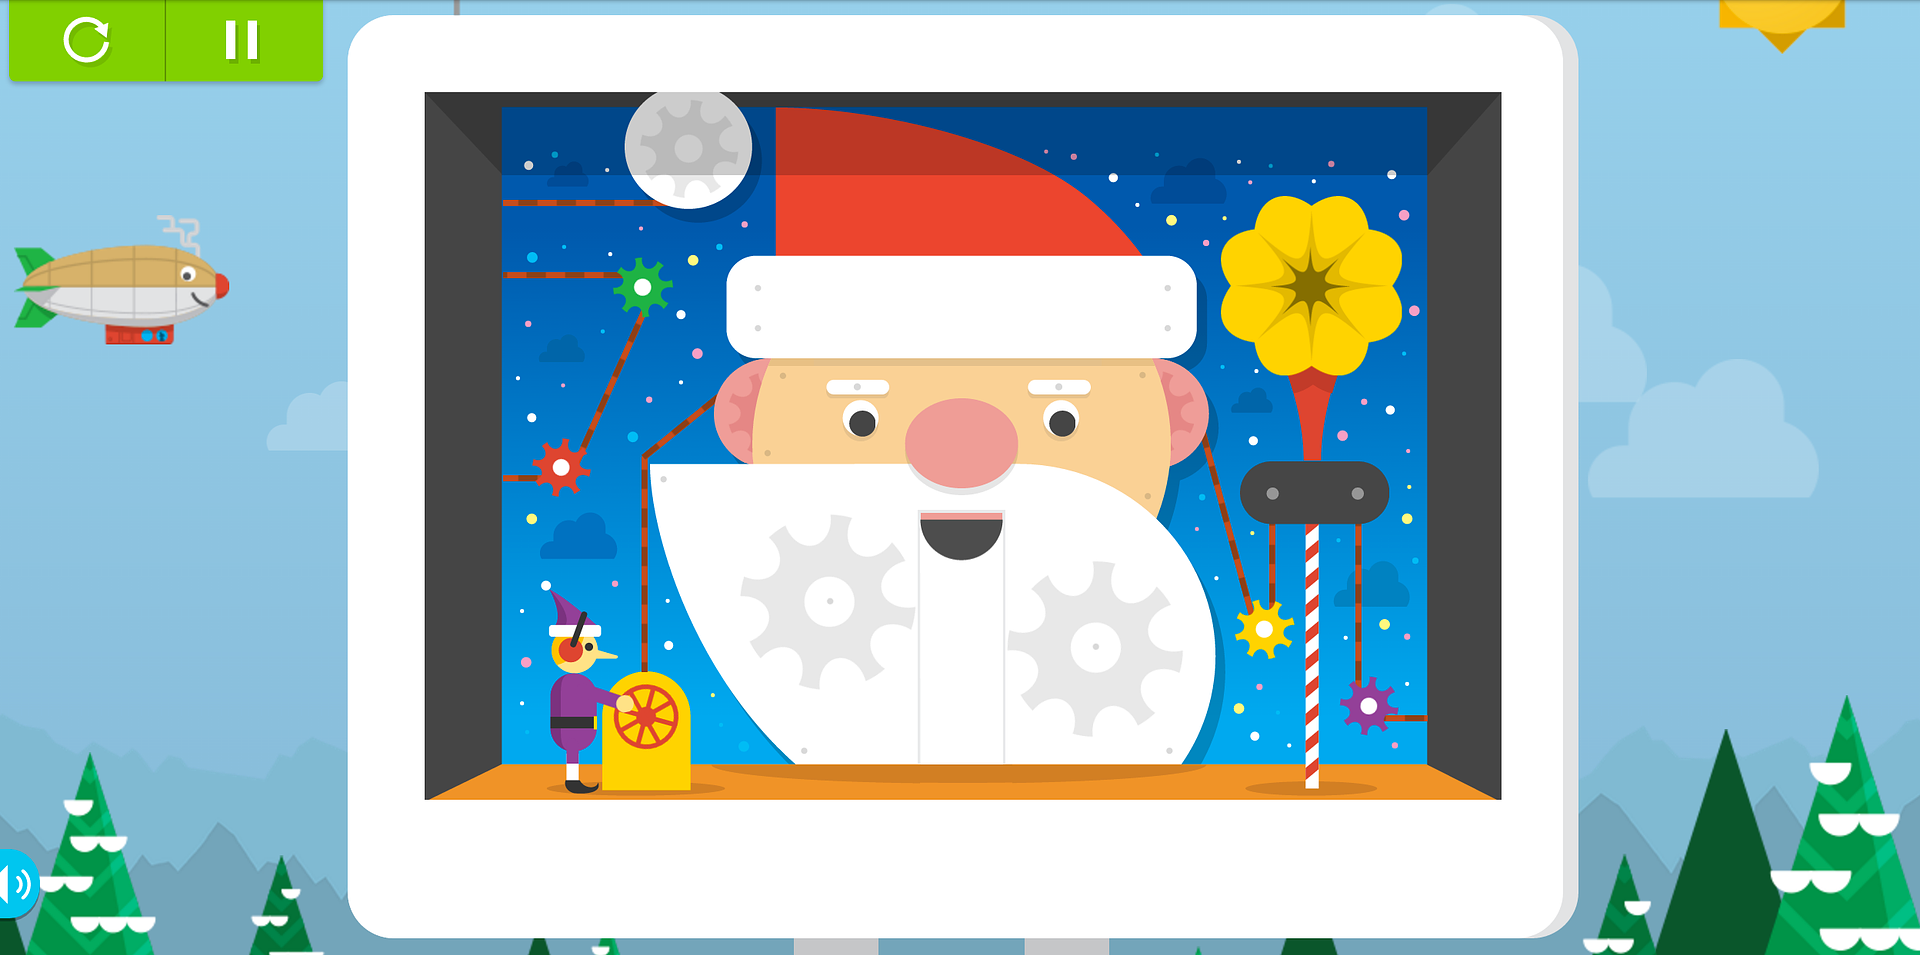 A personal call from Santa that you customize, courtesy of Google. Wonderful!